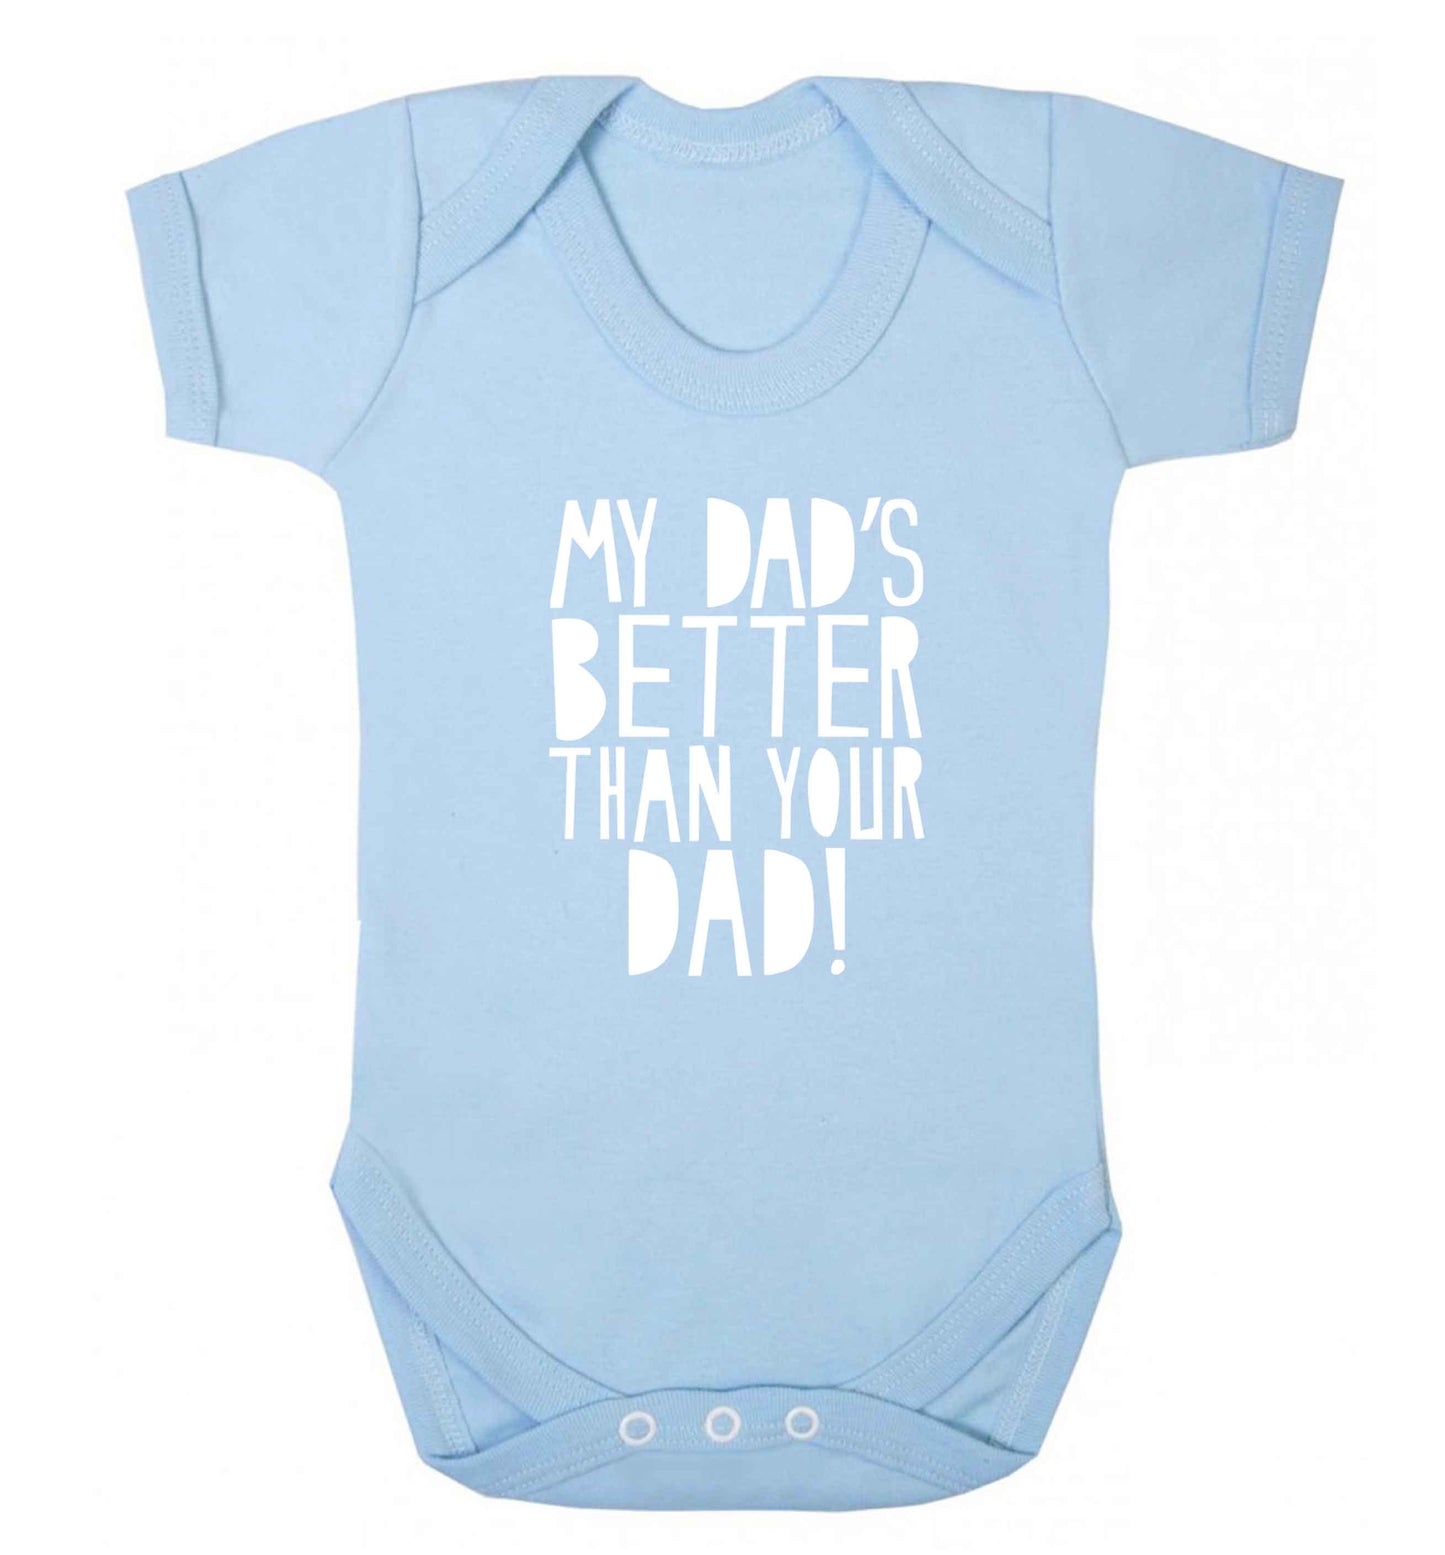 My dad's better than your dad! baby vest pale blue 18-24 months